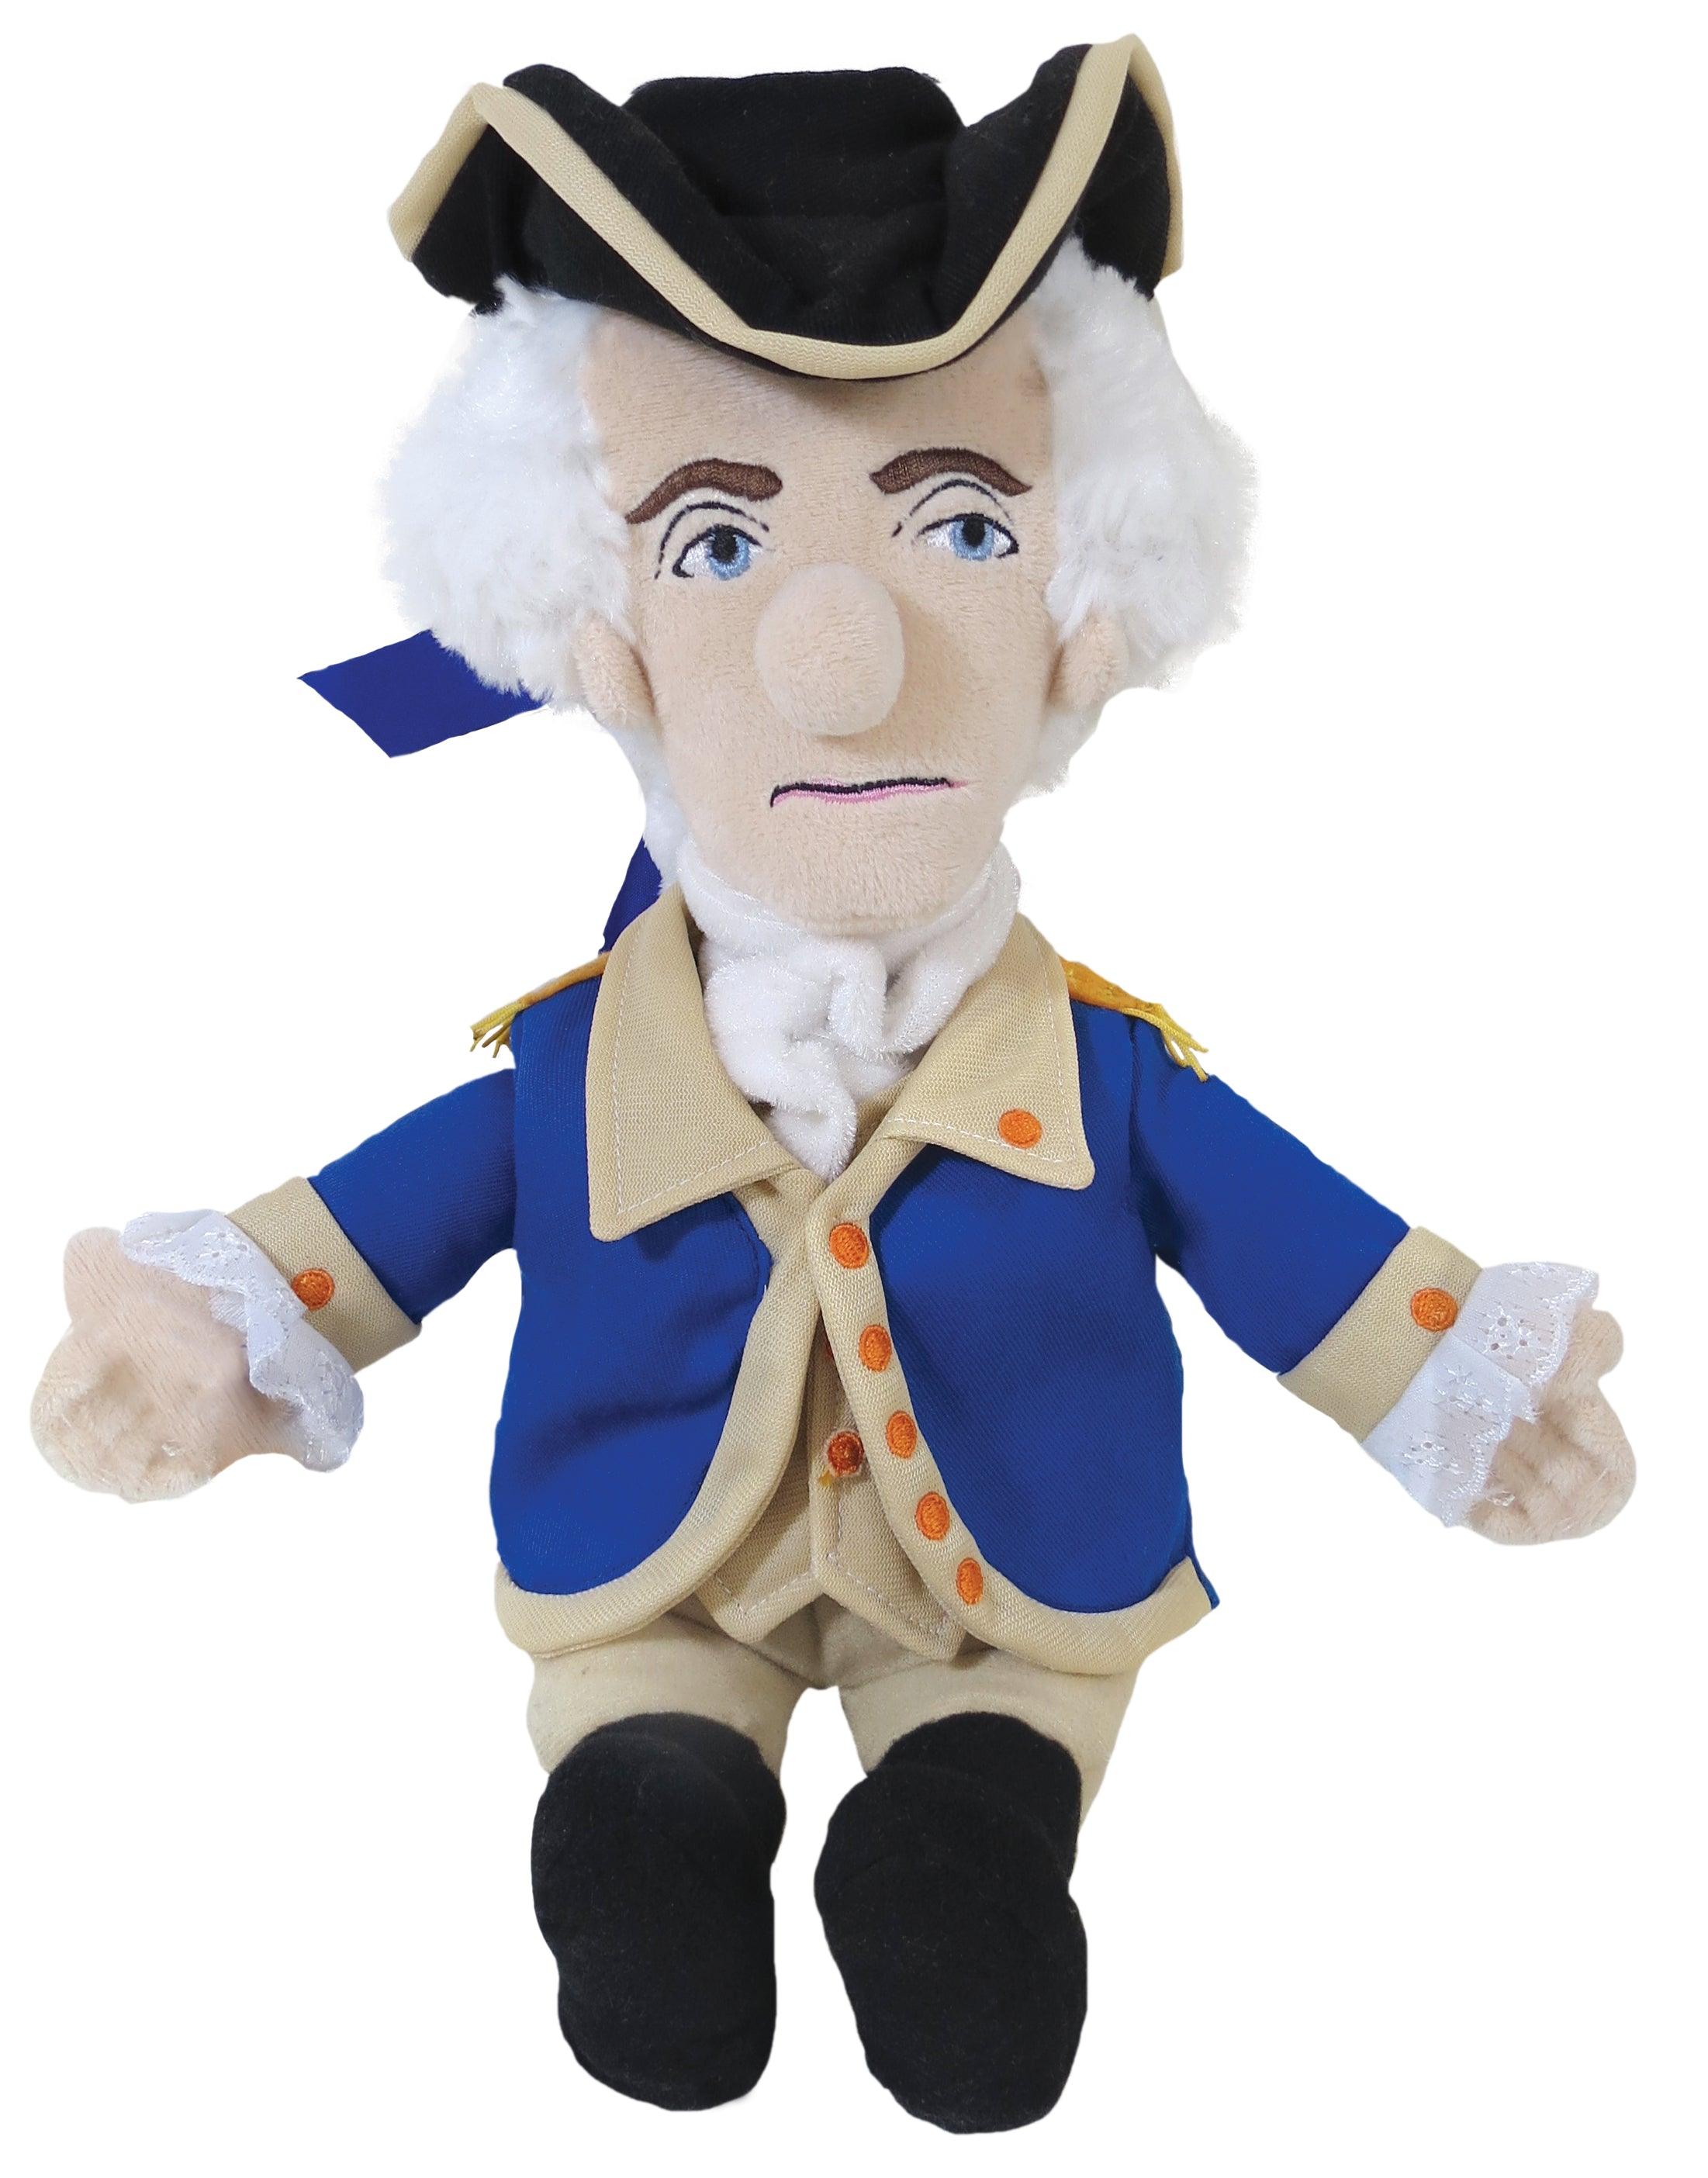 Product photo of George Washington Plush Doll, a novelty gift manufactured by The Unemployed Philosophers Guild.